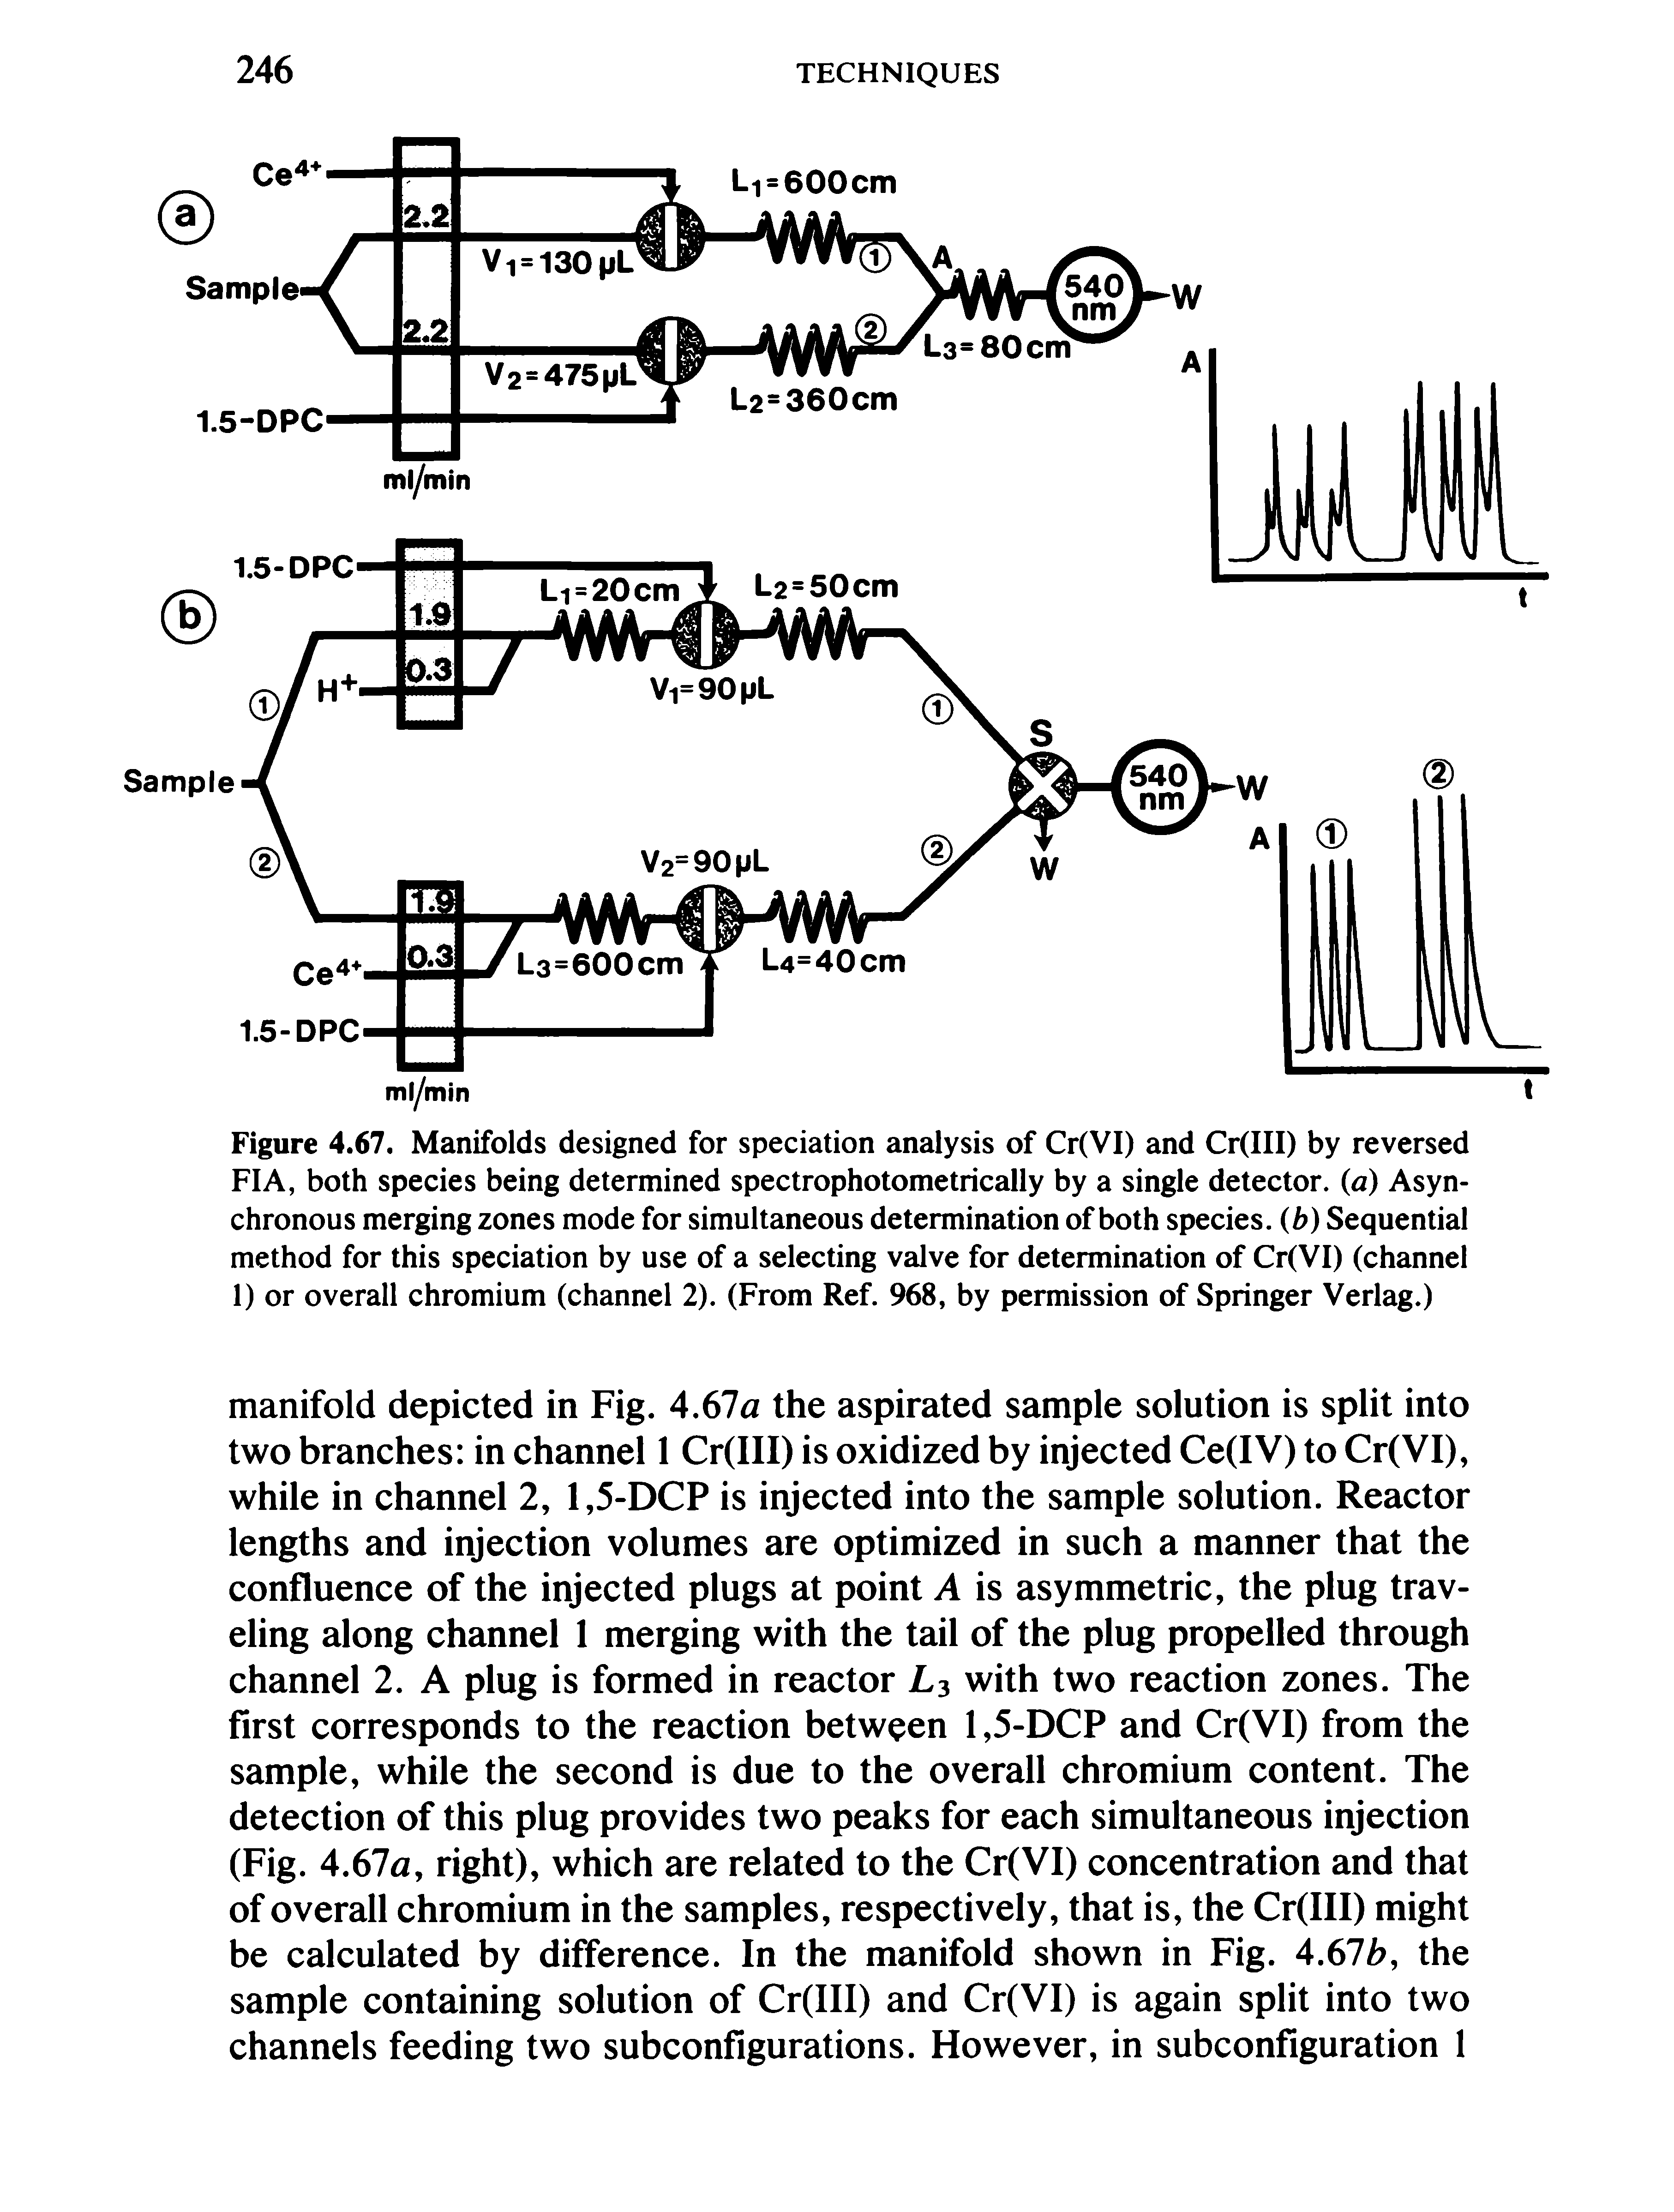 Figure 4.67. Manifolds designed for speciation analysis of Cr(VI) and Cr(III) by reversed FI A, both species being determined spectrophotometrically by a single detector, (a) Asynchronous merging zones mode for simultaneous determination of both species, (b) Sequential method for this speciation by use of a selecting valve for determination of Cr(VI) (channel 1) or overall chromium (channel 2). (From Ref. 968, by permission of Springer Verlag.)...